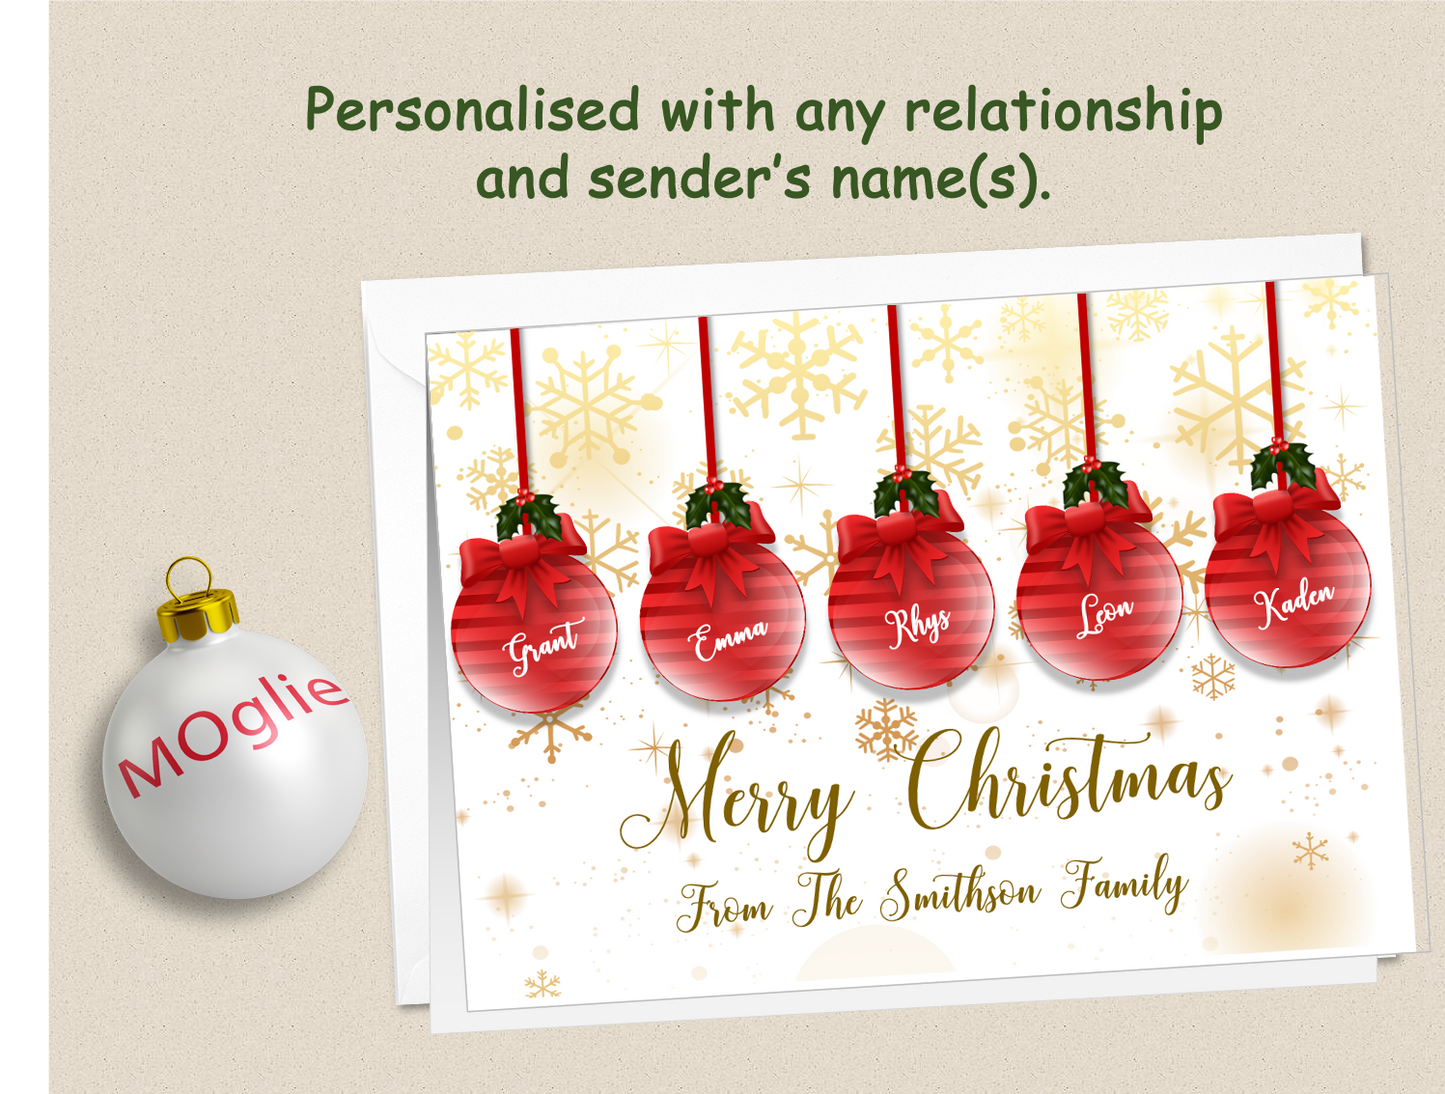 Personalised Christmas Xmas Bauble card with names and family name - BAUB1